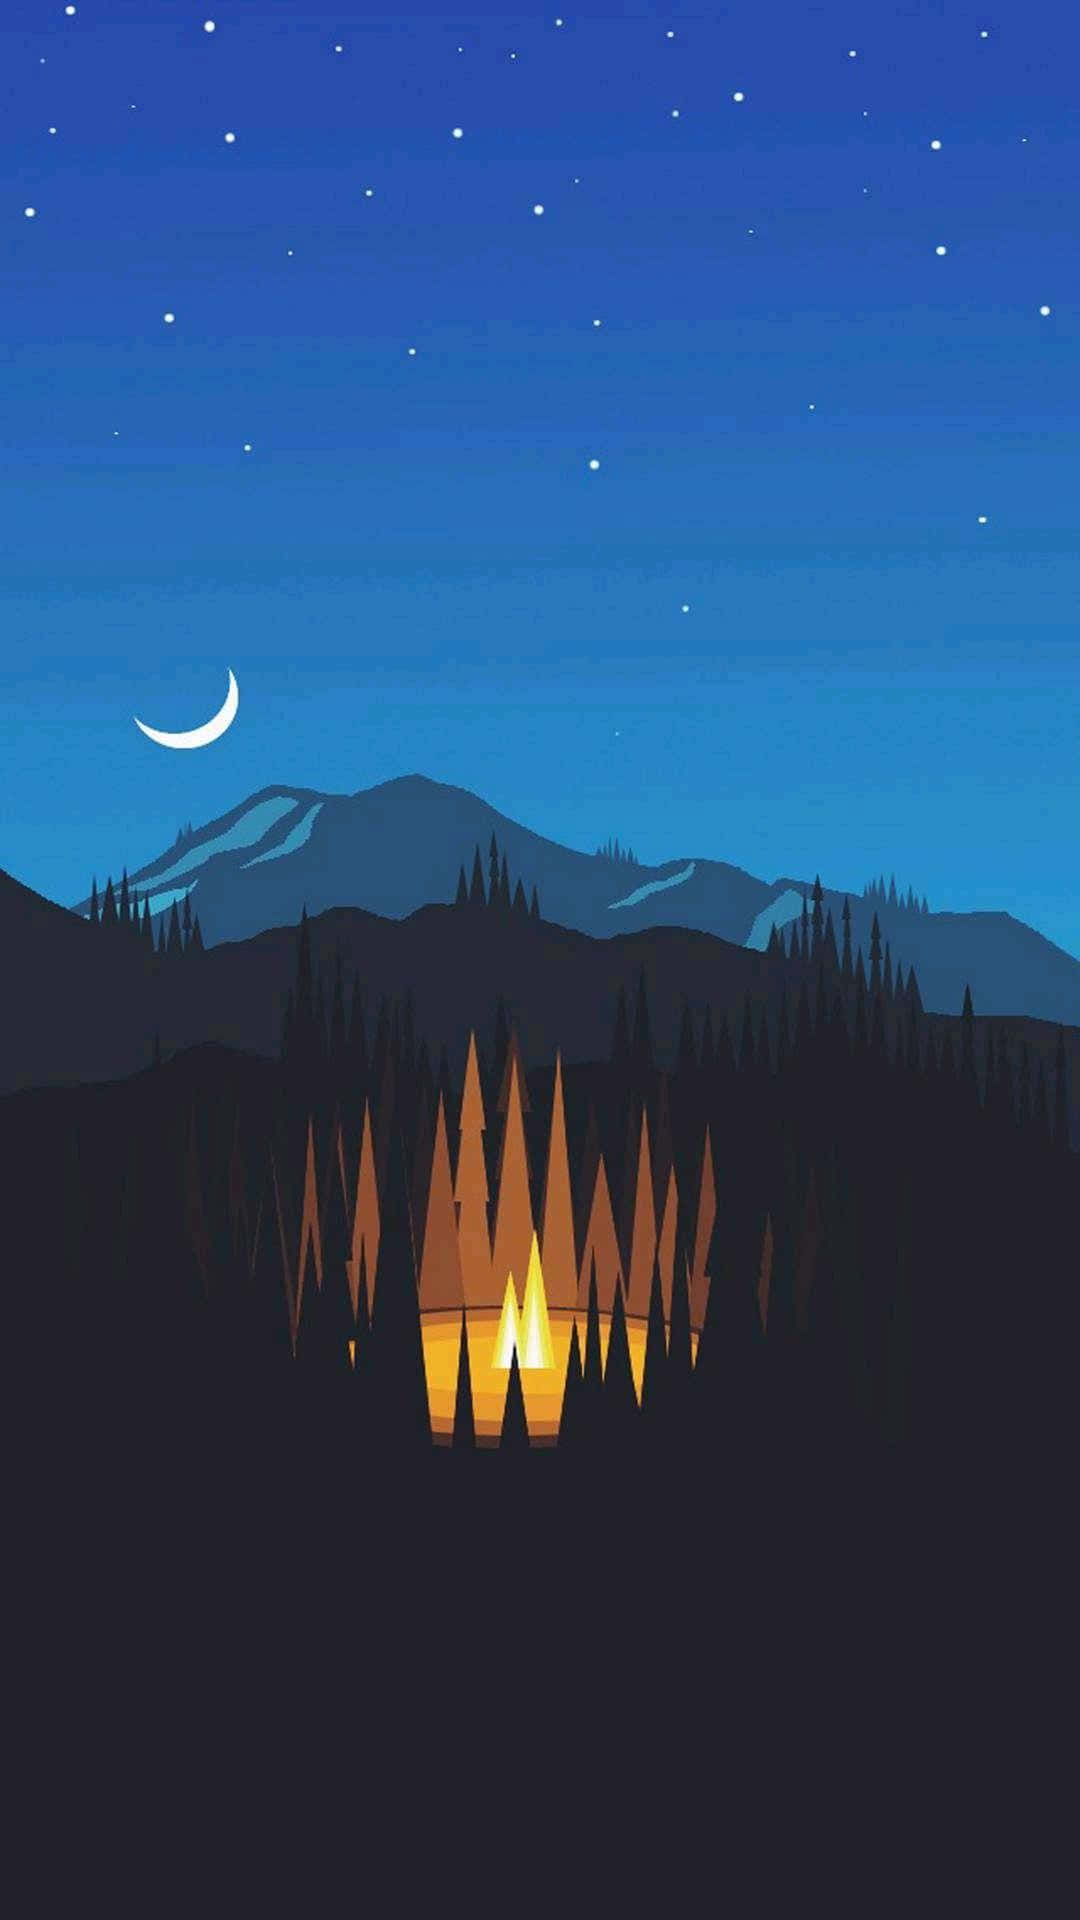 A Campfire In The Mountains At Night